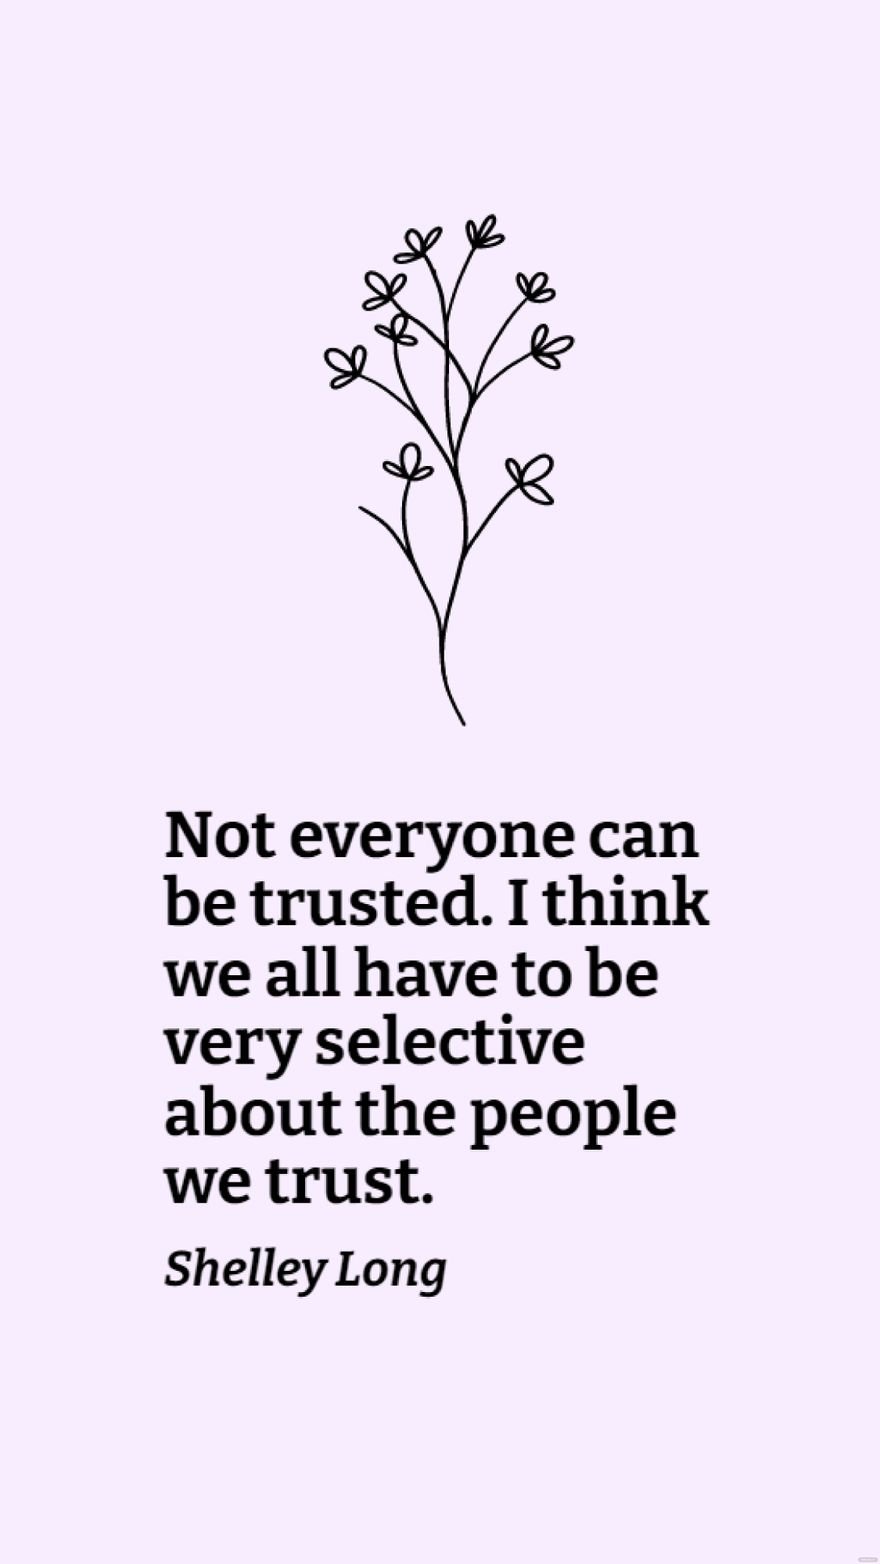 Free Shelley Long - Not everyone can be trusted. I think we all have to be very selective about the people we trust. in JPG